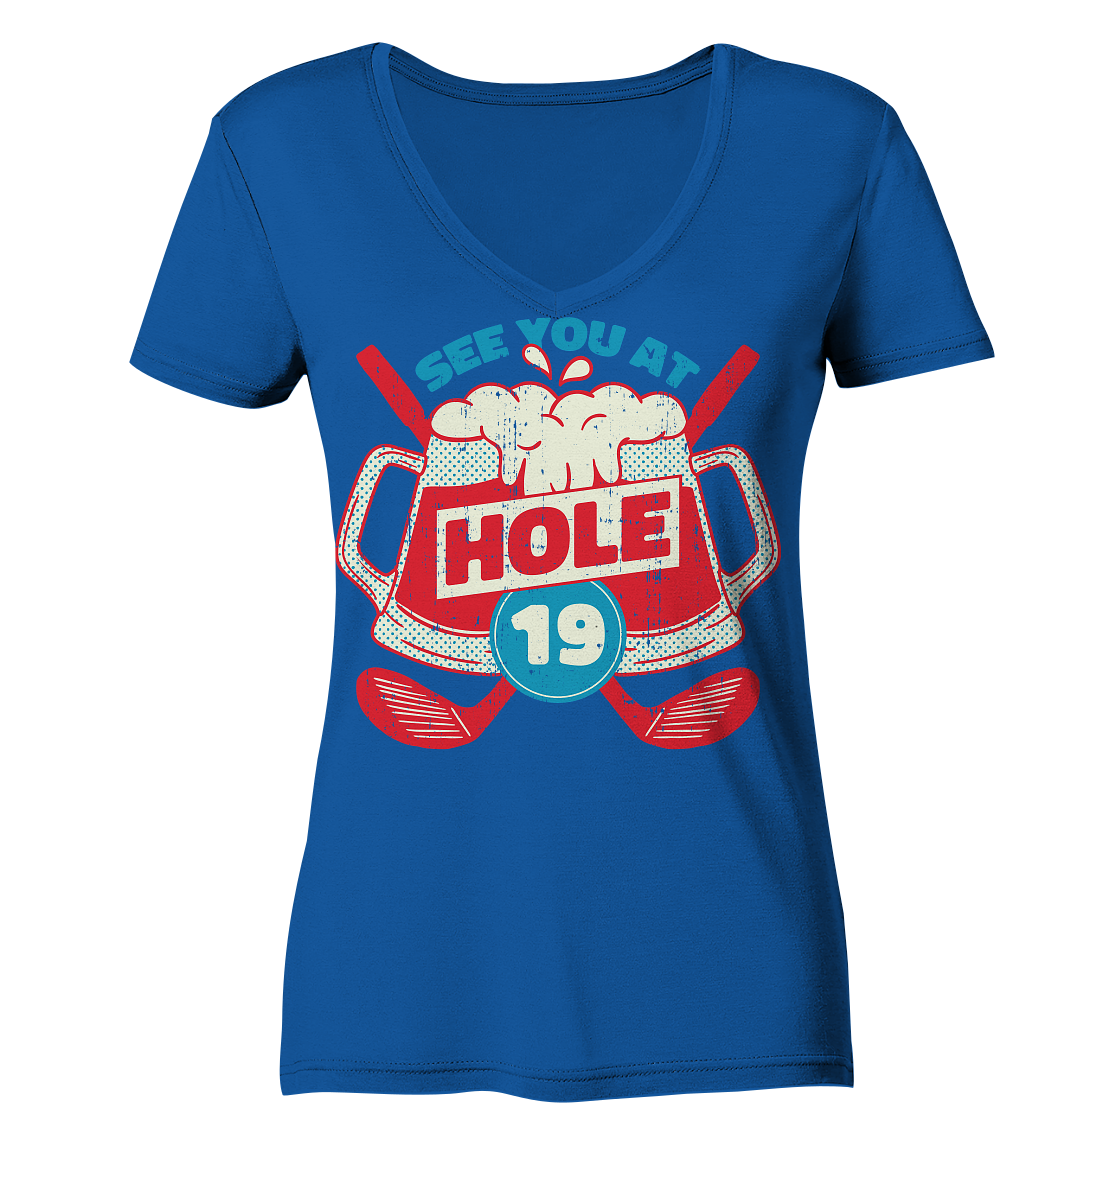 Golf ,See you at Hole 19 , Wir sehen uns bei Loch 19 - Ladies Organic V-Neck Shirt